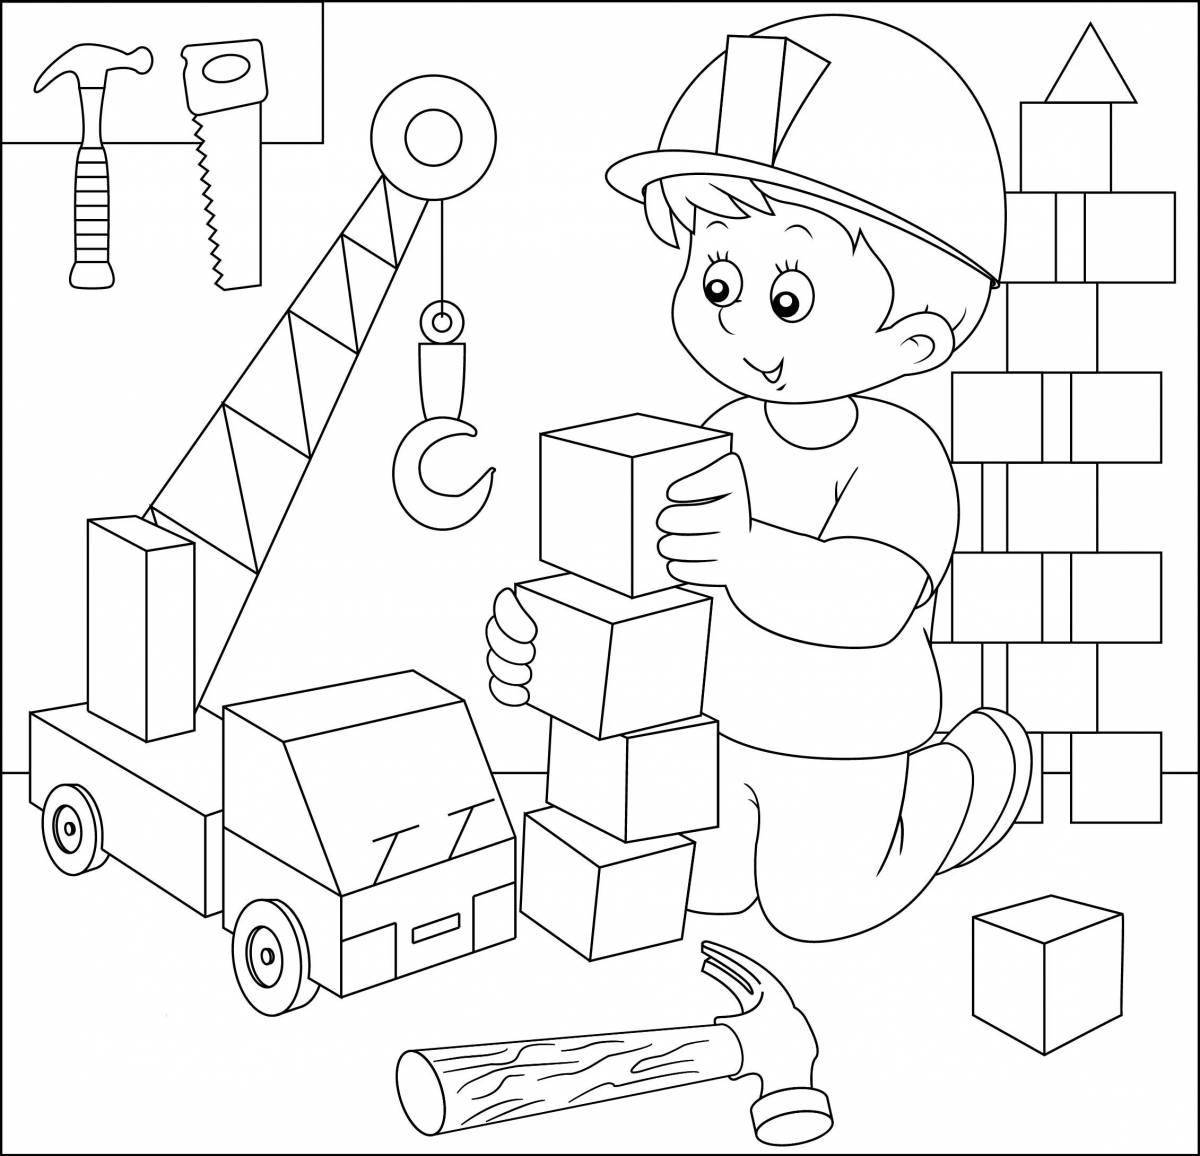 Coloring book inspiring construction professions